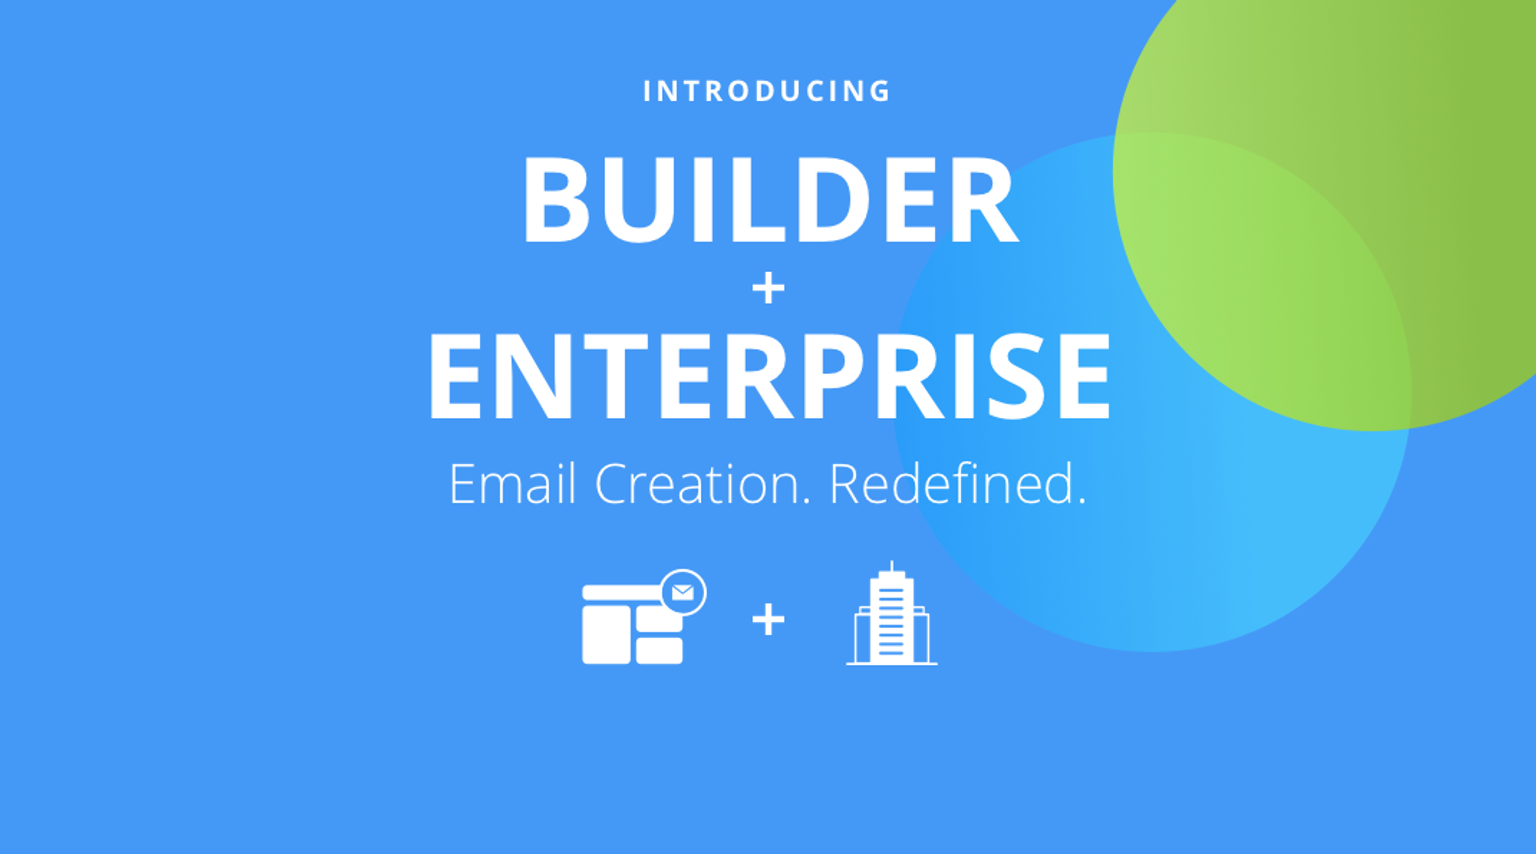 Redefining the email creation process